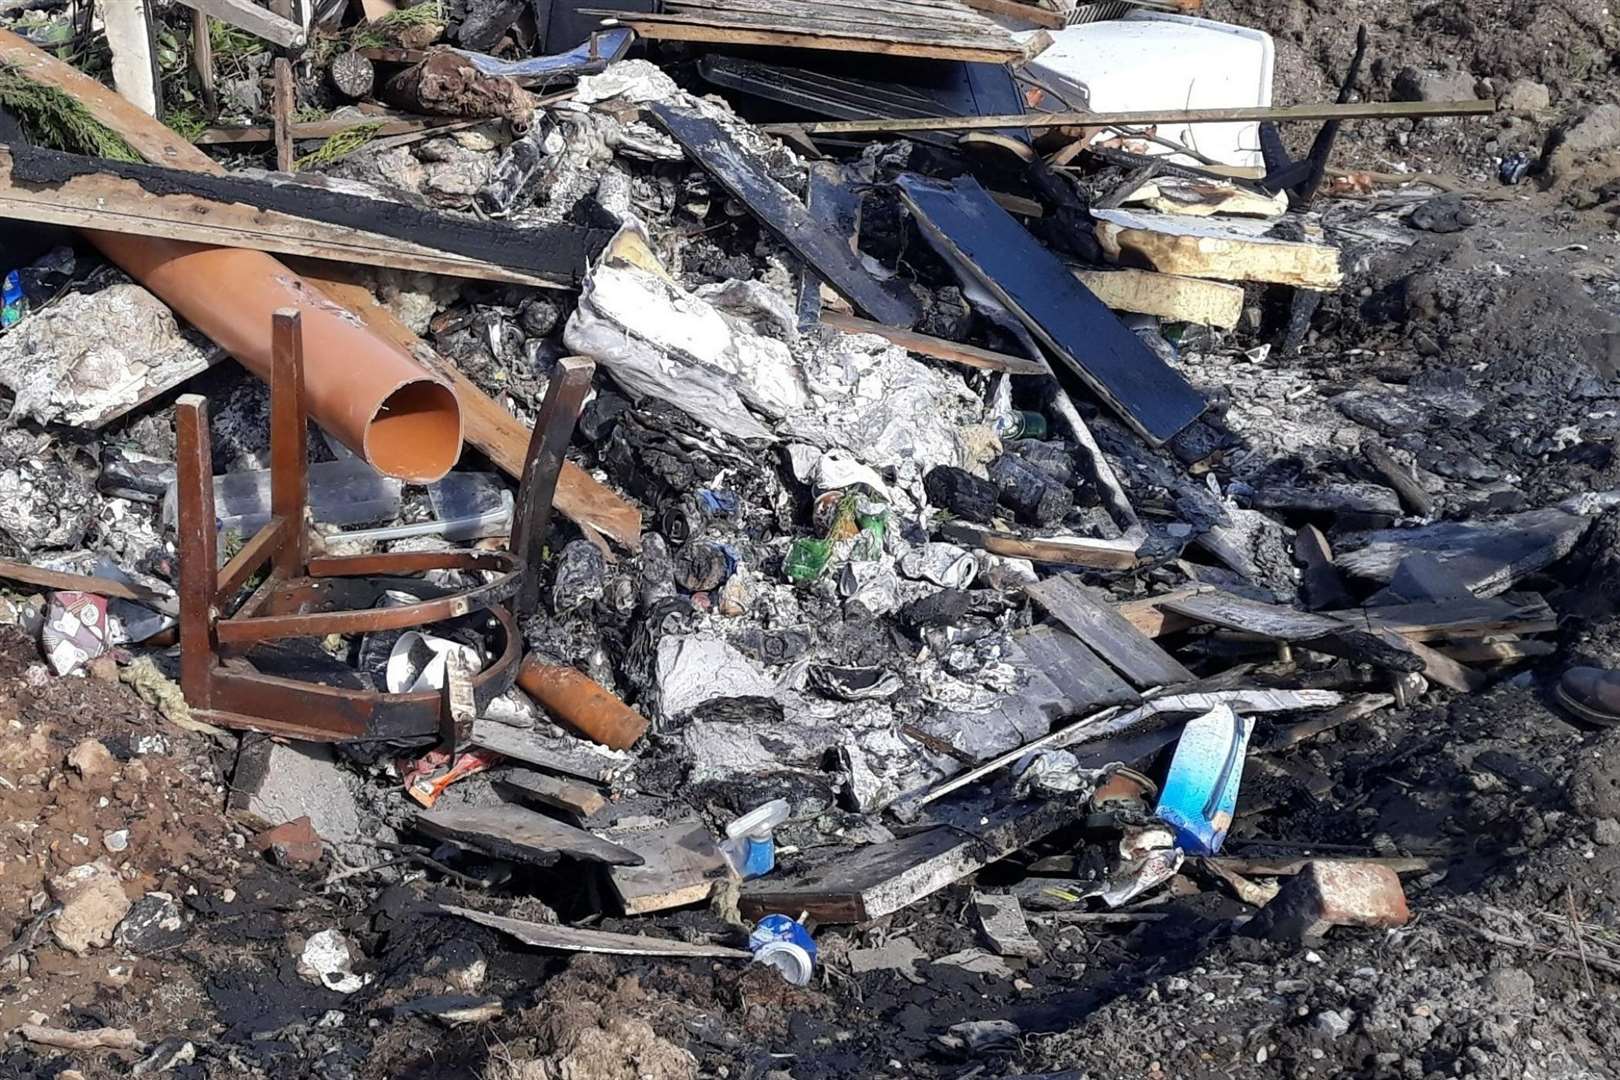 Michael Latter allowed waste to be dumped and burnt on his property. Photo: Ashford Borough Council